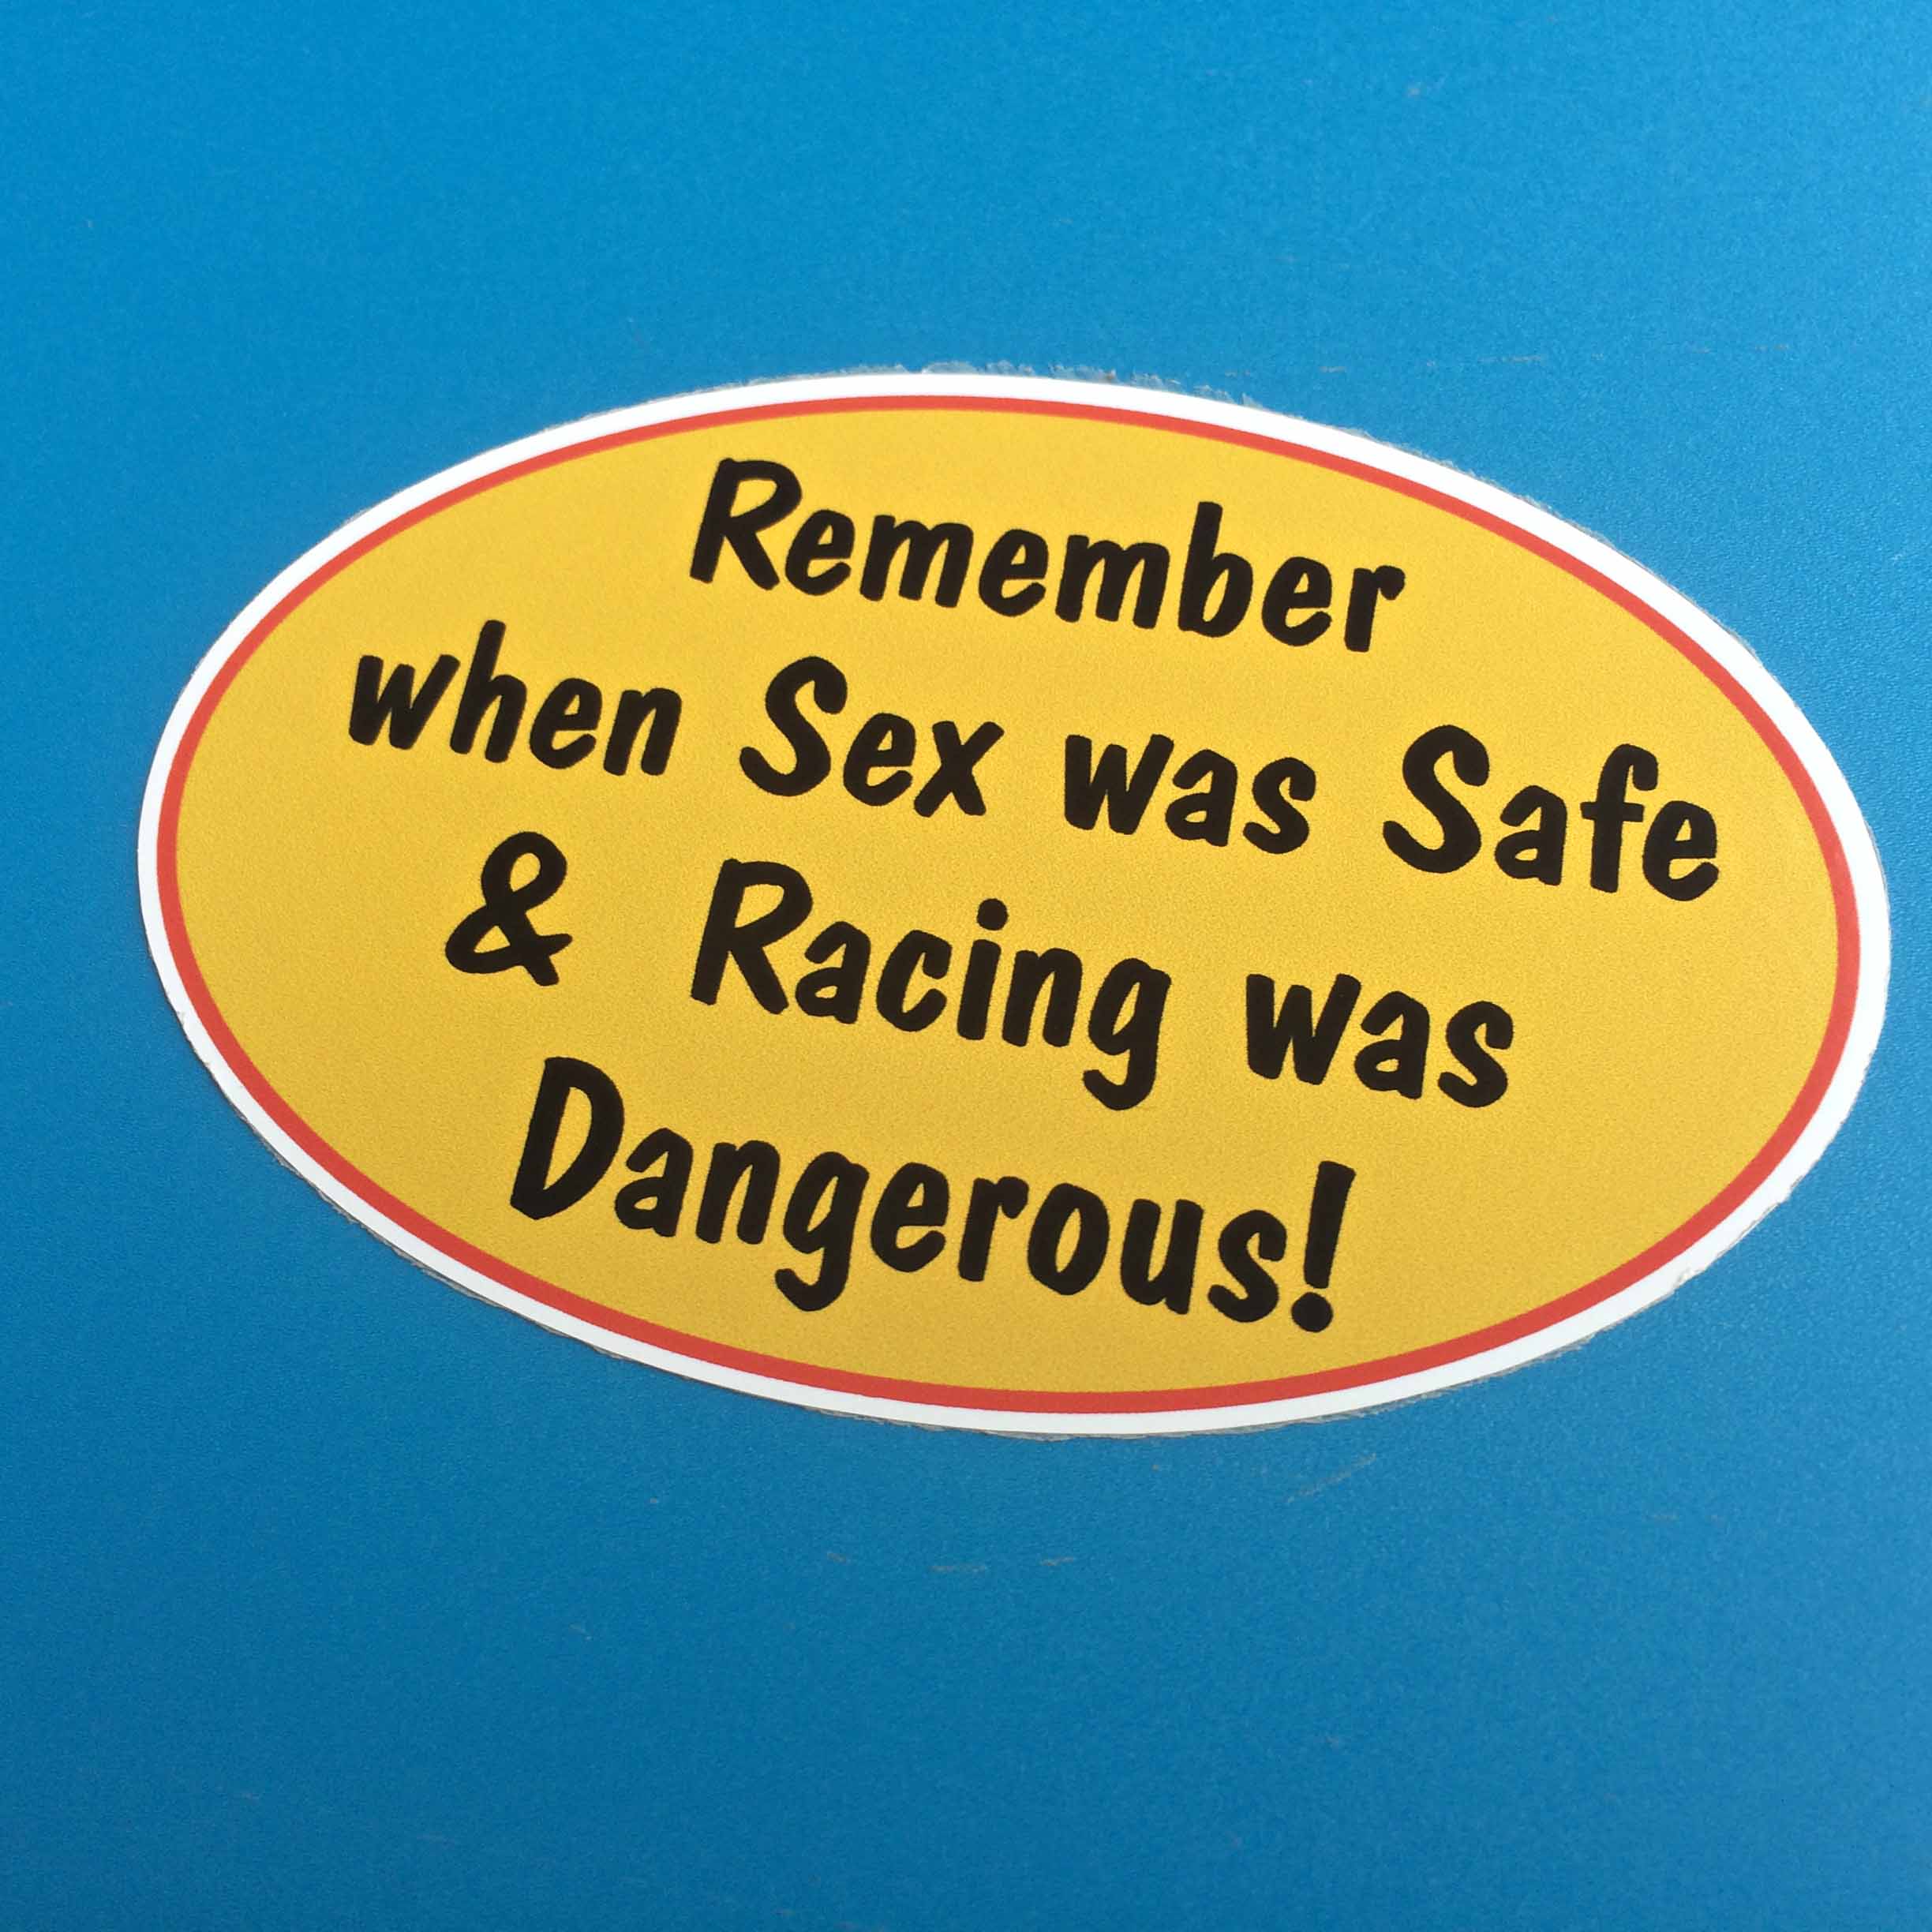 REMEMBER WHEN SEX WAS SAFE STICKER. Remember when Sex was Safe & Racing was Dangerous! Black lettering on a yellow oval background with a red border.